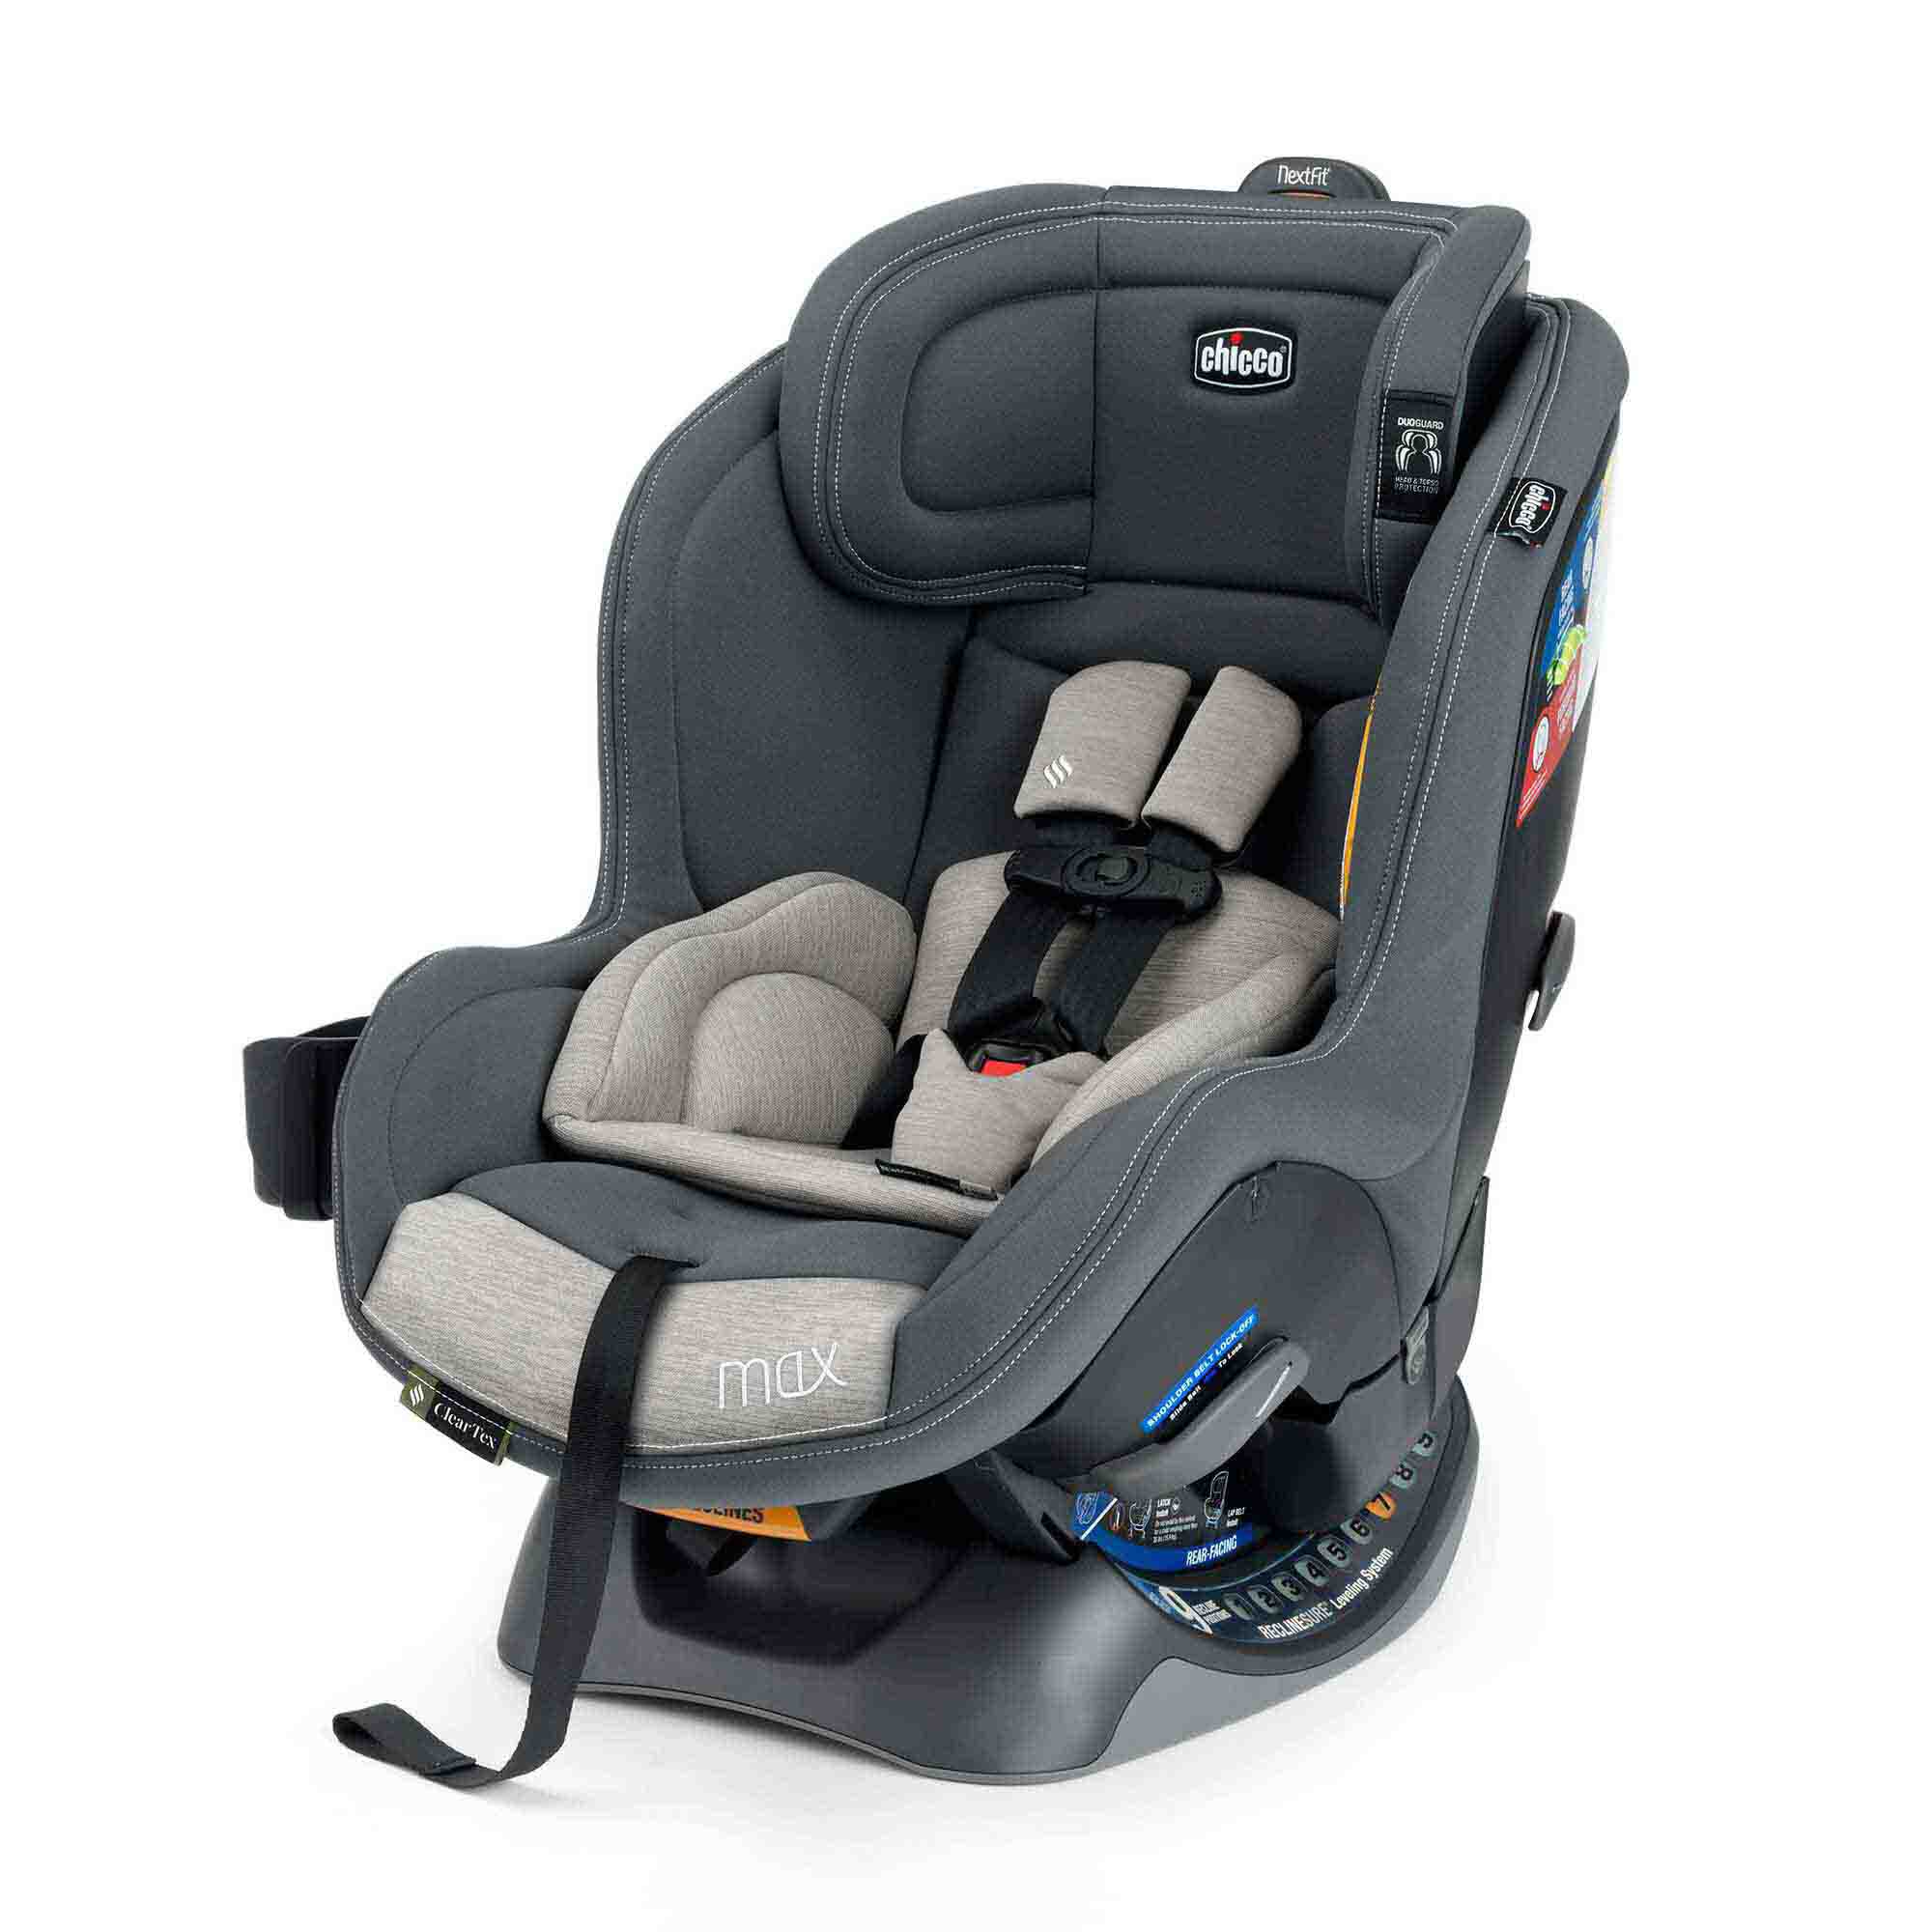 rear-facing Extended-Use Convertible Car Seat for babies